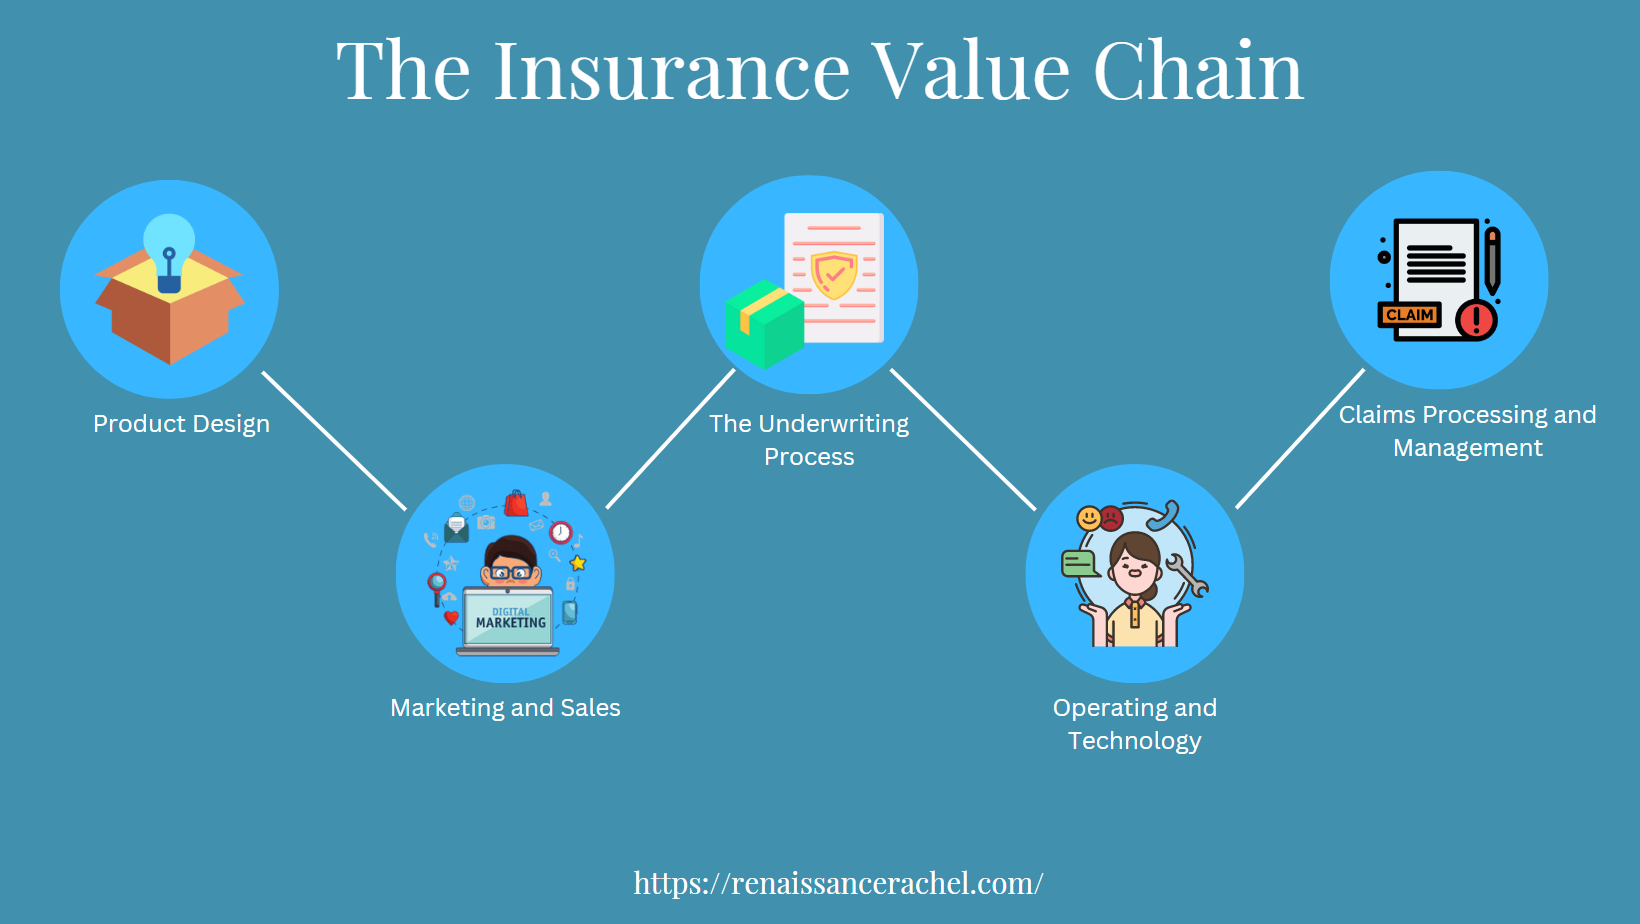 The insurance value chain. 